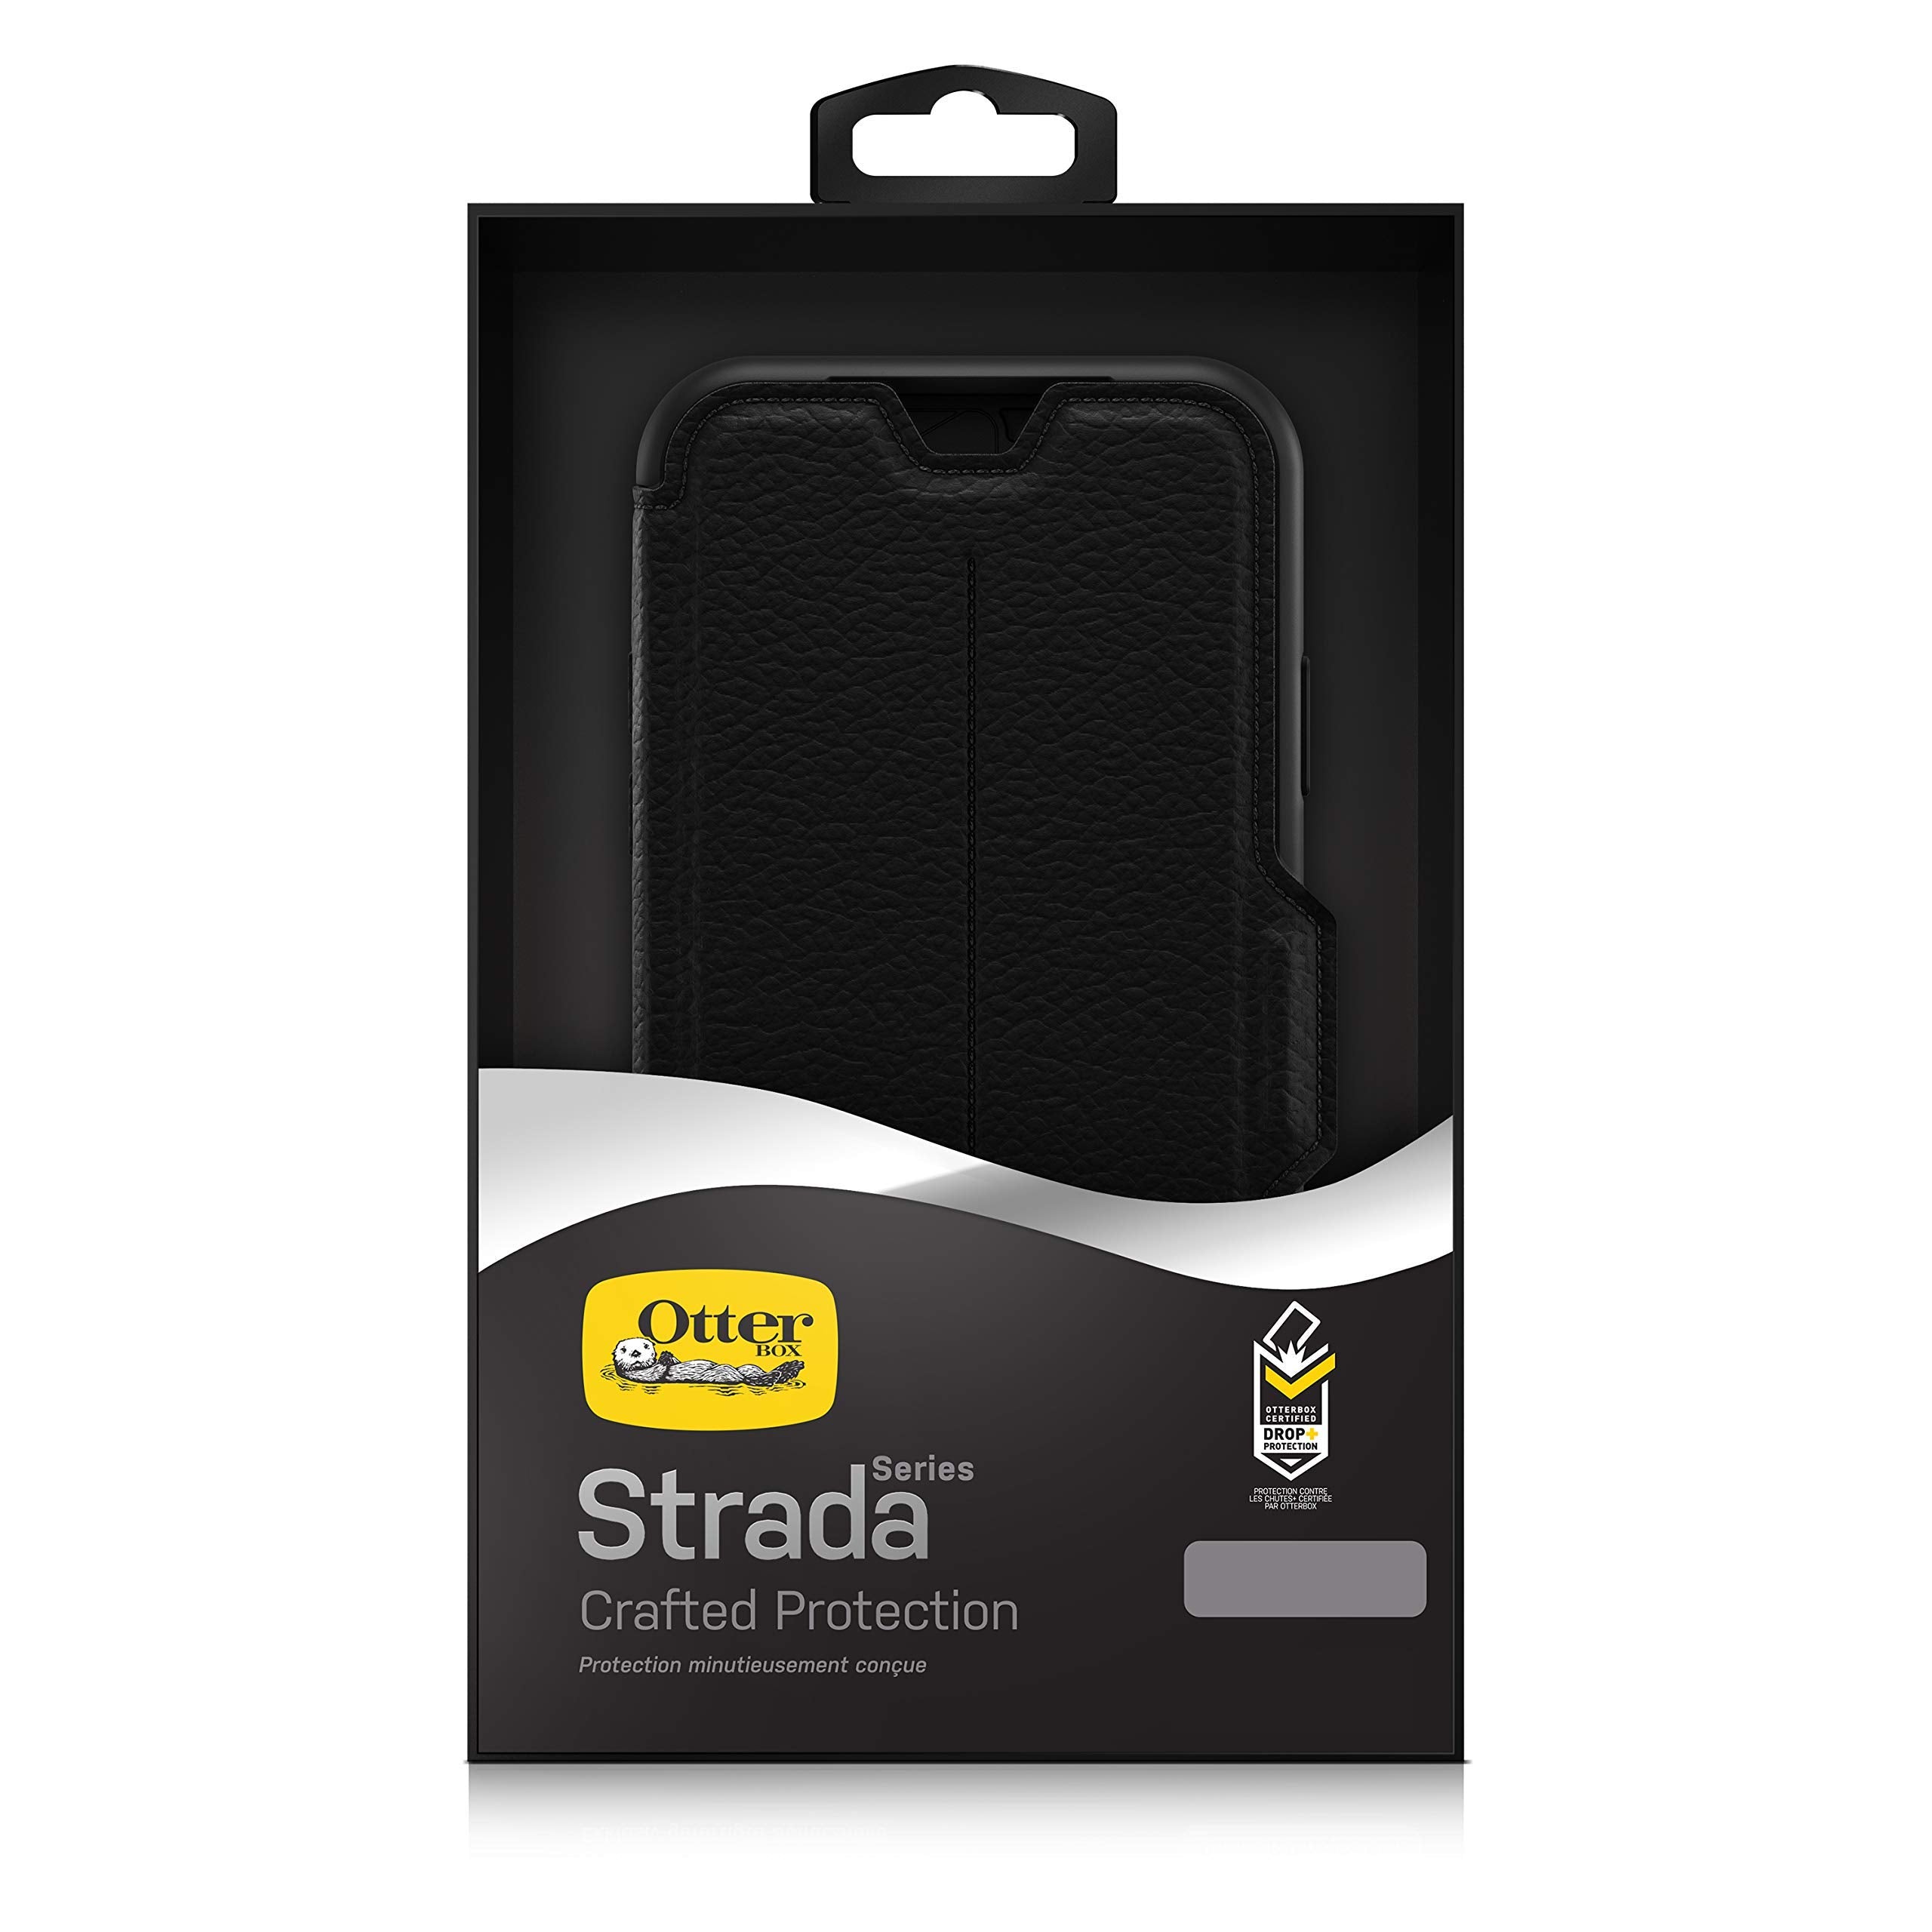 OtterBox Strada Case for iPhone 11, Shockproof, Drop proof, Premium Leather Protective Folio with Two Card Holders, 3x Tested to Military Standard, Black